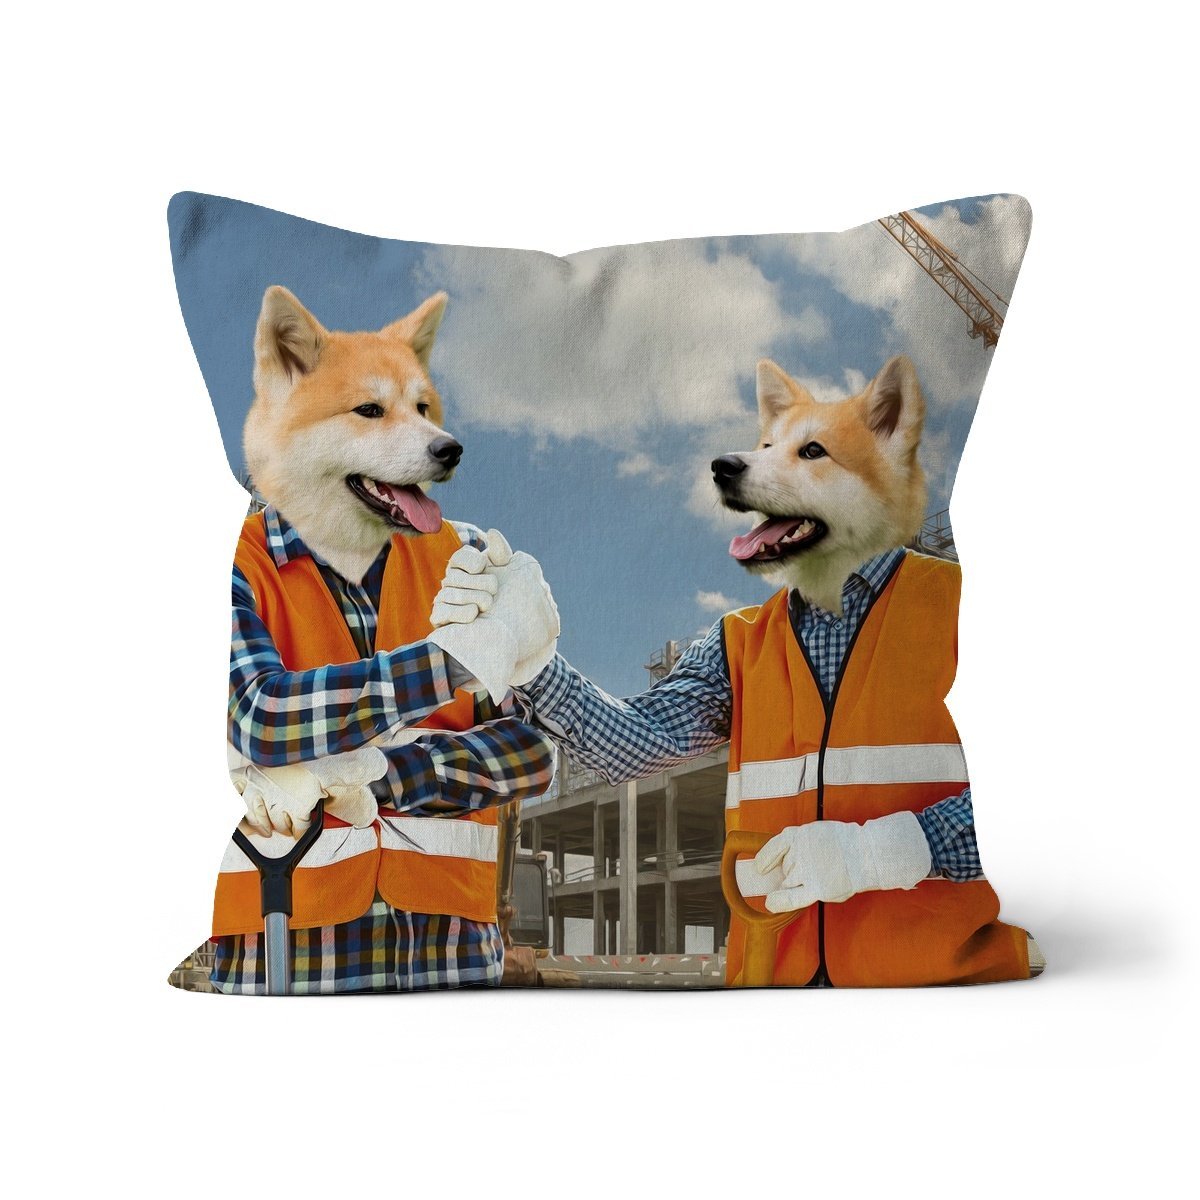 The Construction Workmates: Custom Pet Cushion - Paw & Glory - #pet portraits# - #dog portraits# - #pet portraits uk#paw and glory, custom pet portrait cushion,personalised cat pillow, dog shaped pillows, custom pillow cover, pillows with dogs picture, my pet pillow